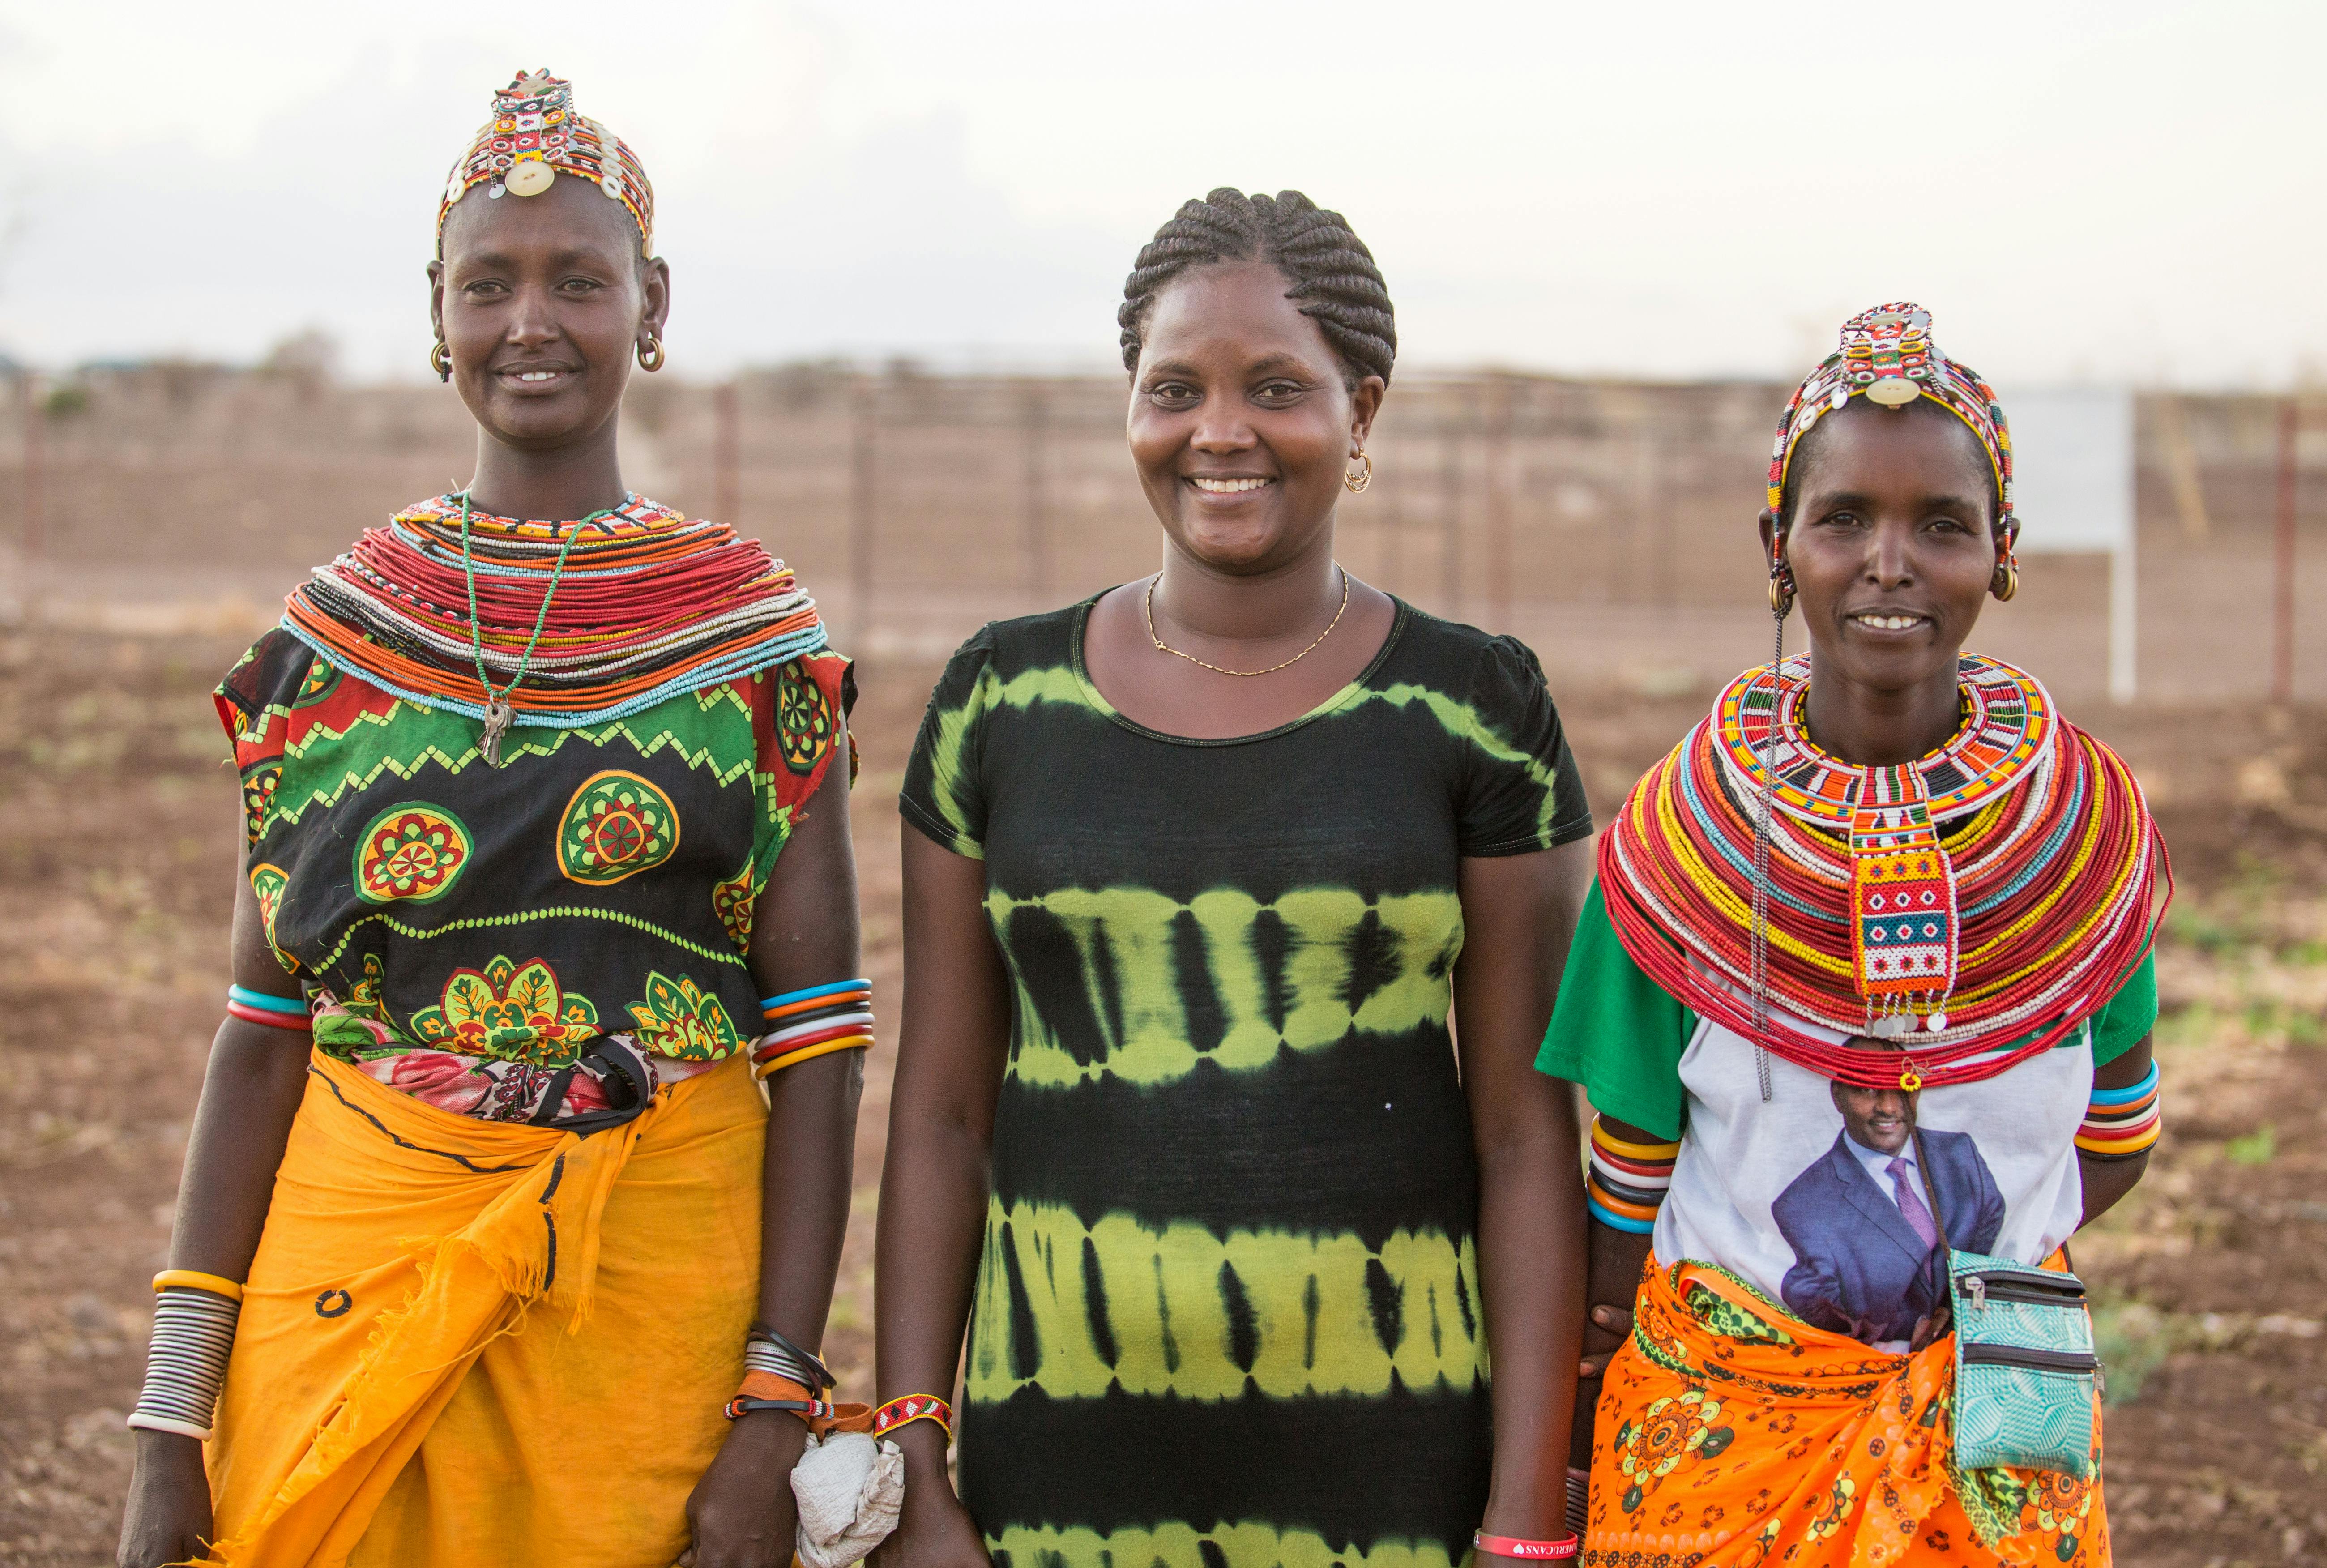 International Womens Day Photoessay - Three Kenyan women holding hands in traditional culture outfits and attire, with beaded necklaces and headbands